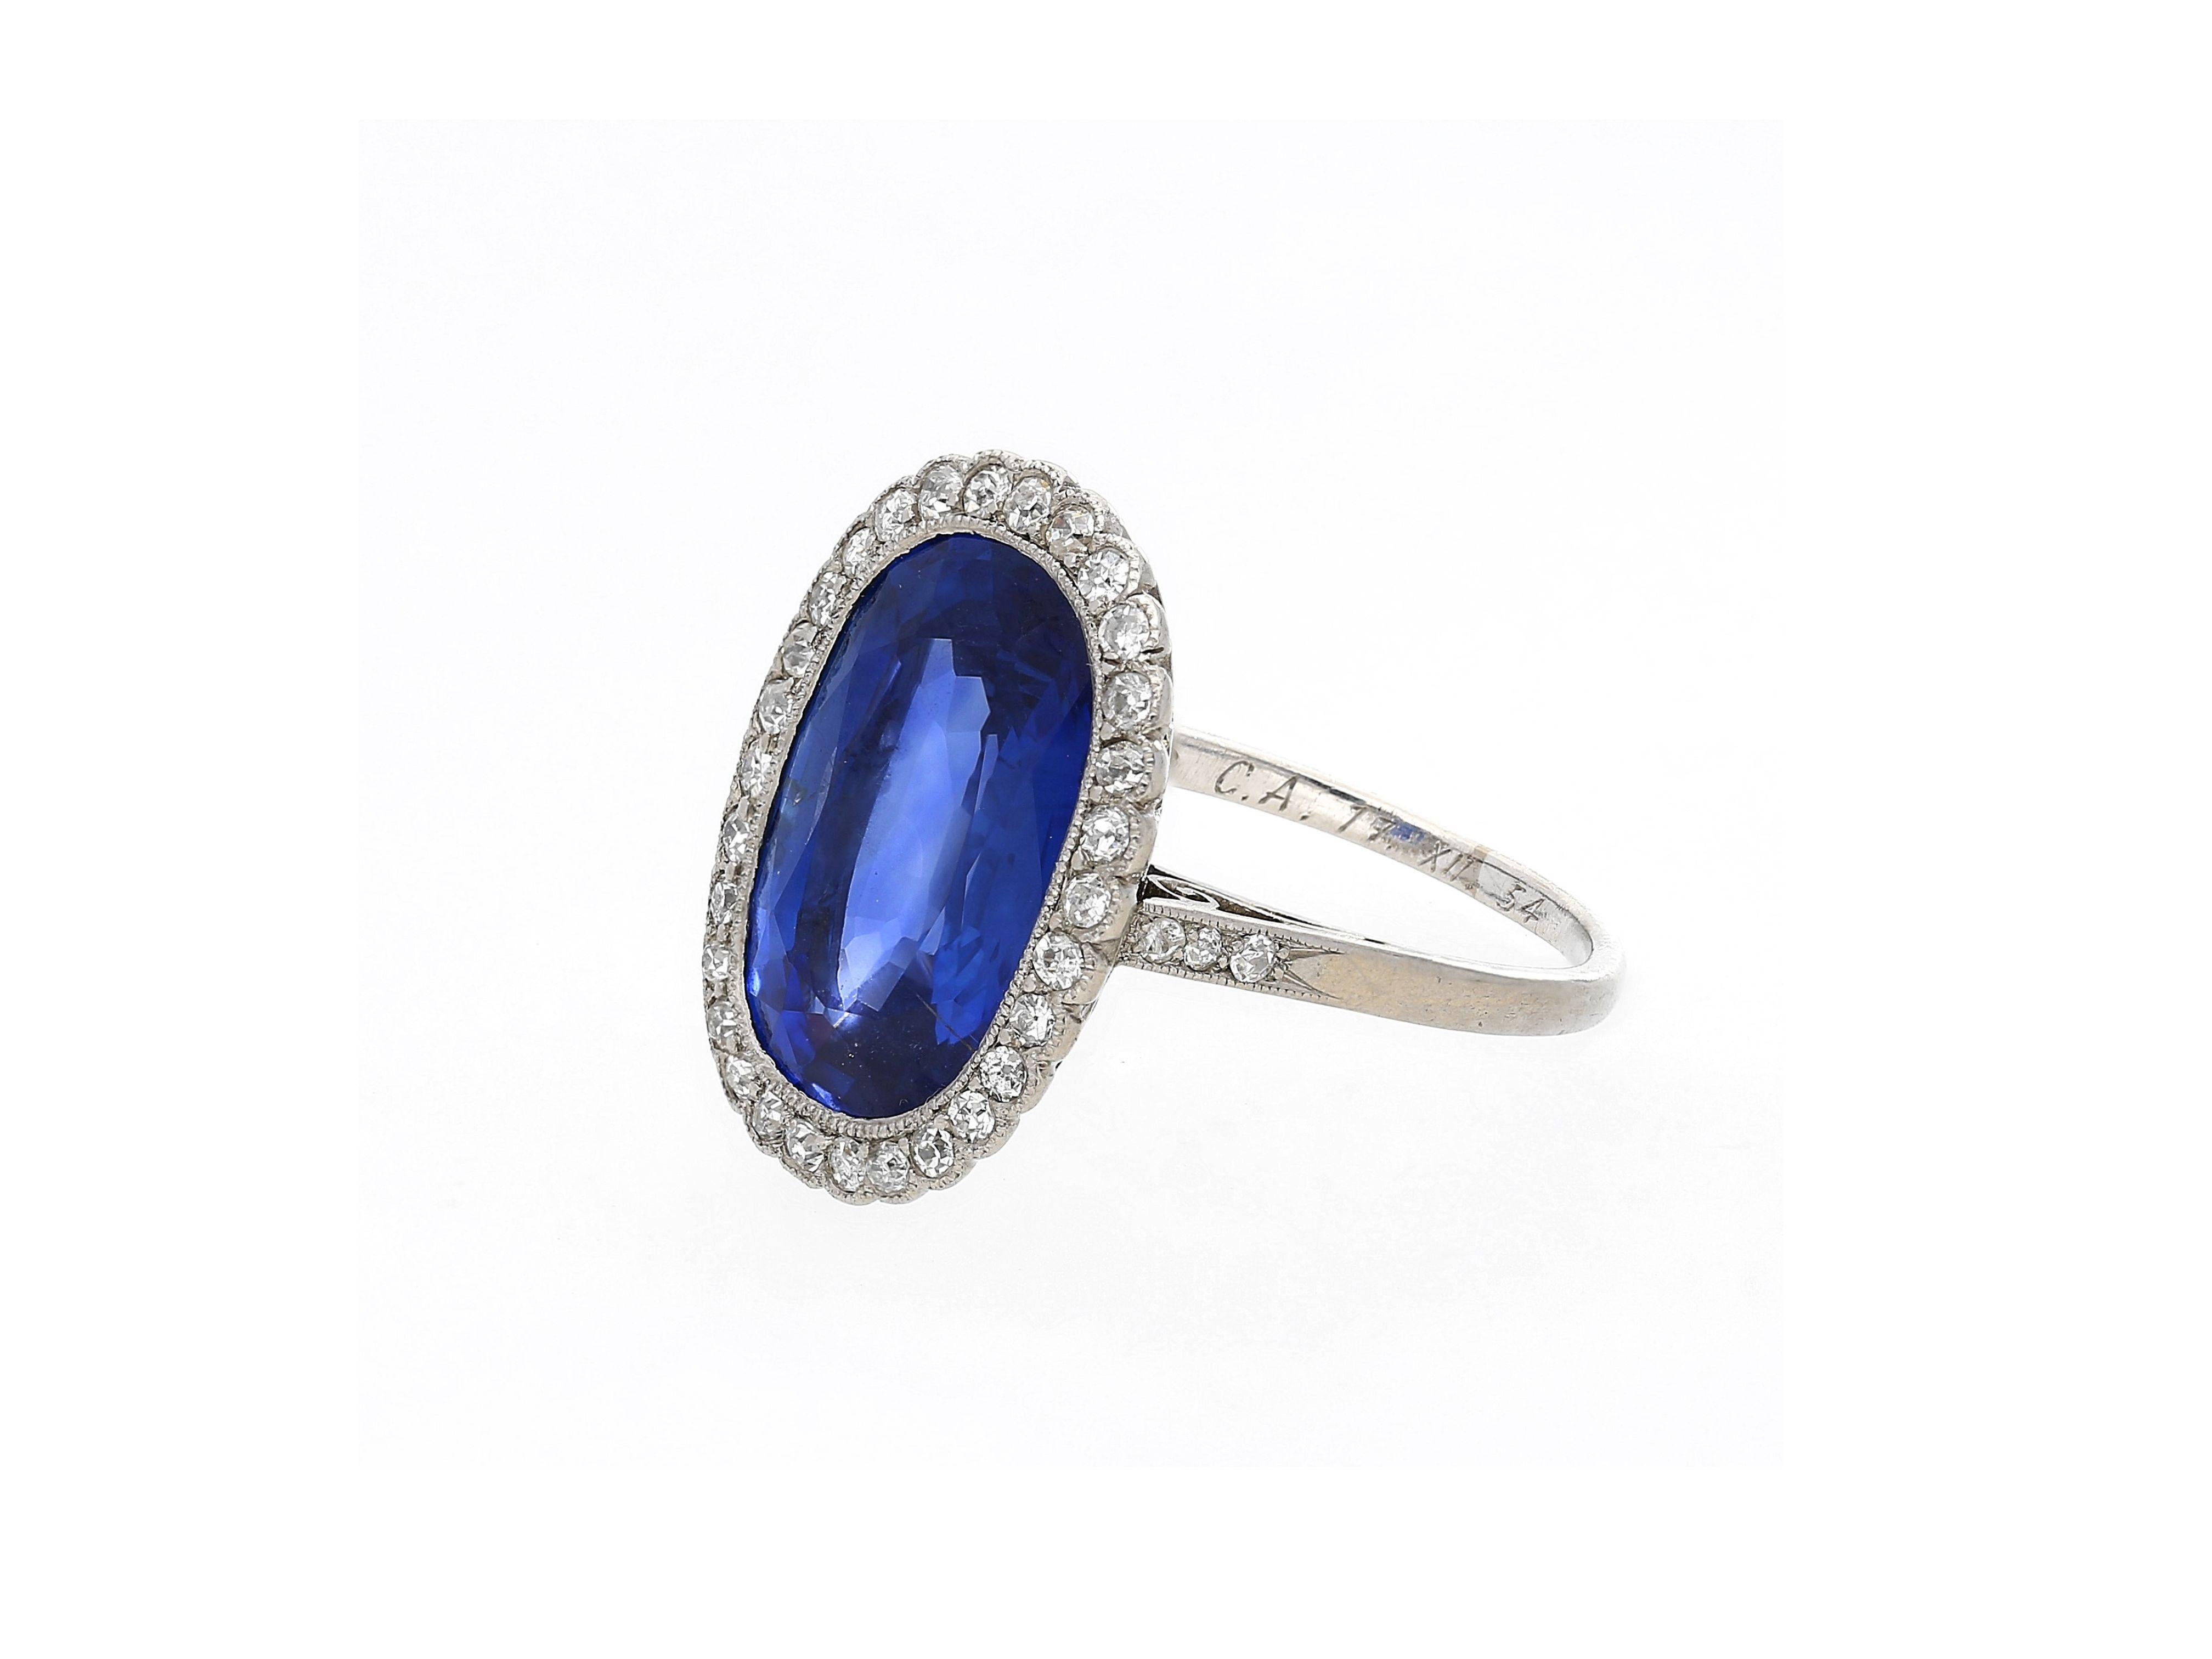 AGL Certified 7.76 Carat natural Burma Cushion Cut Blue Sapphire Ring in Platinum. Originating from the legendary Edwardian-Art Deco era. Circa 1915-1935. 

This vintage ring features a stunning hand made filigree on the bottom of the ring basket